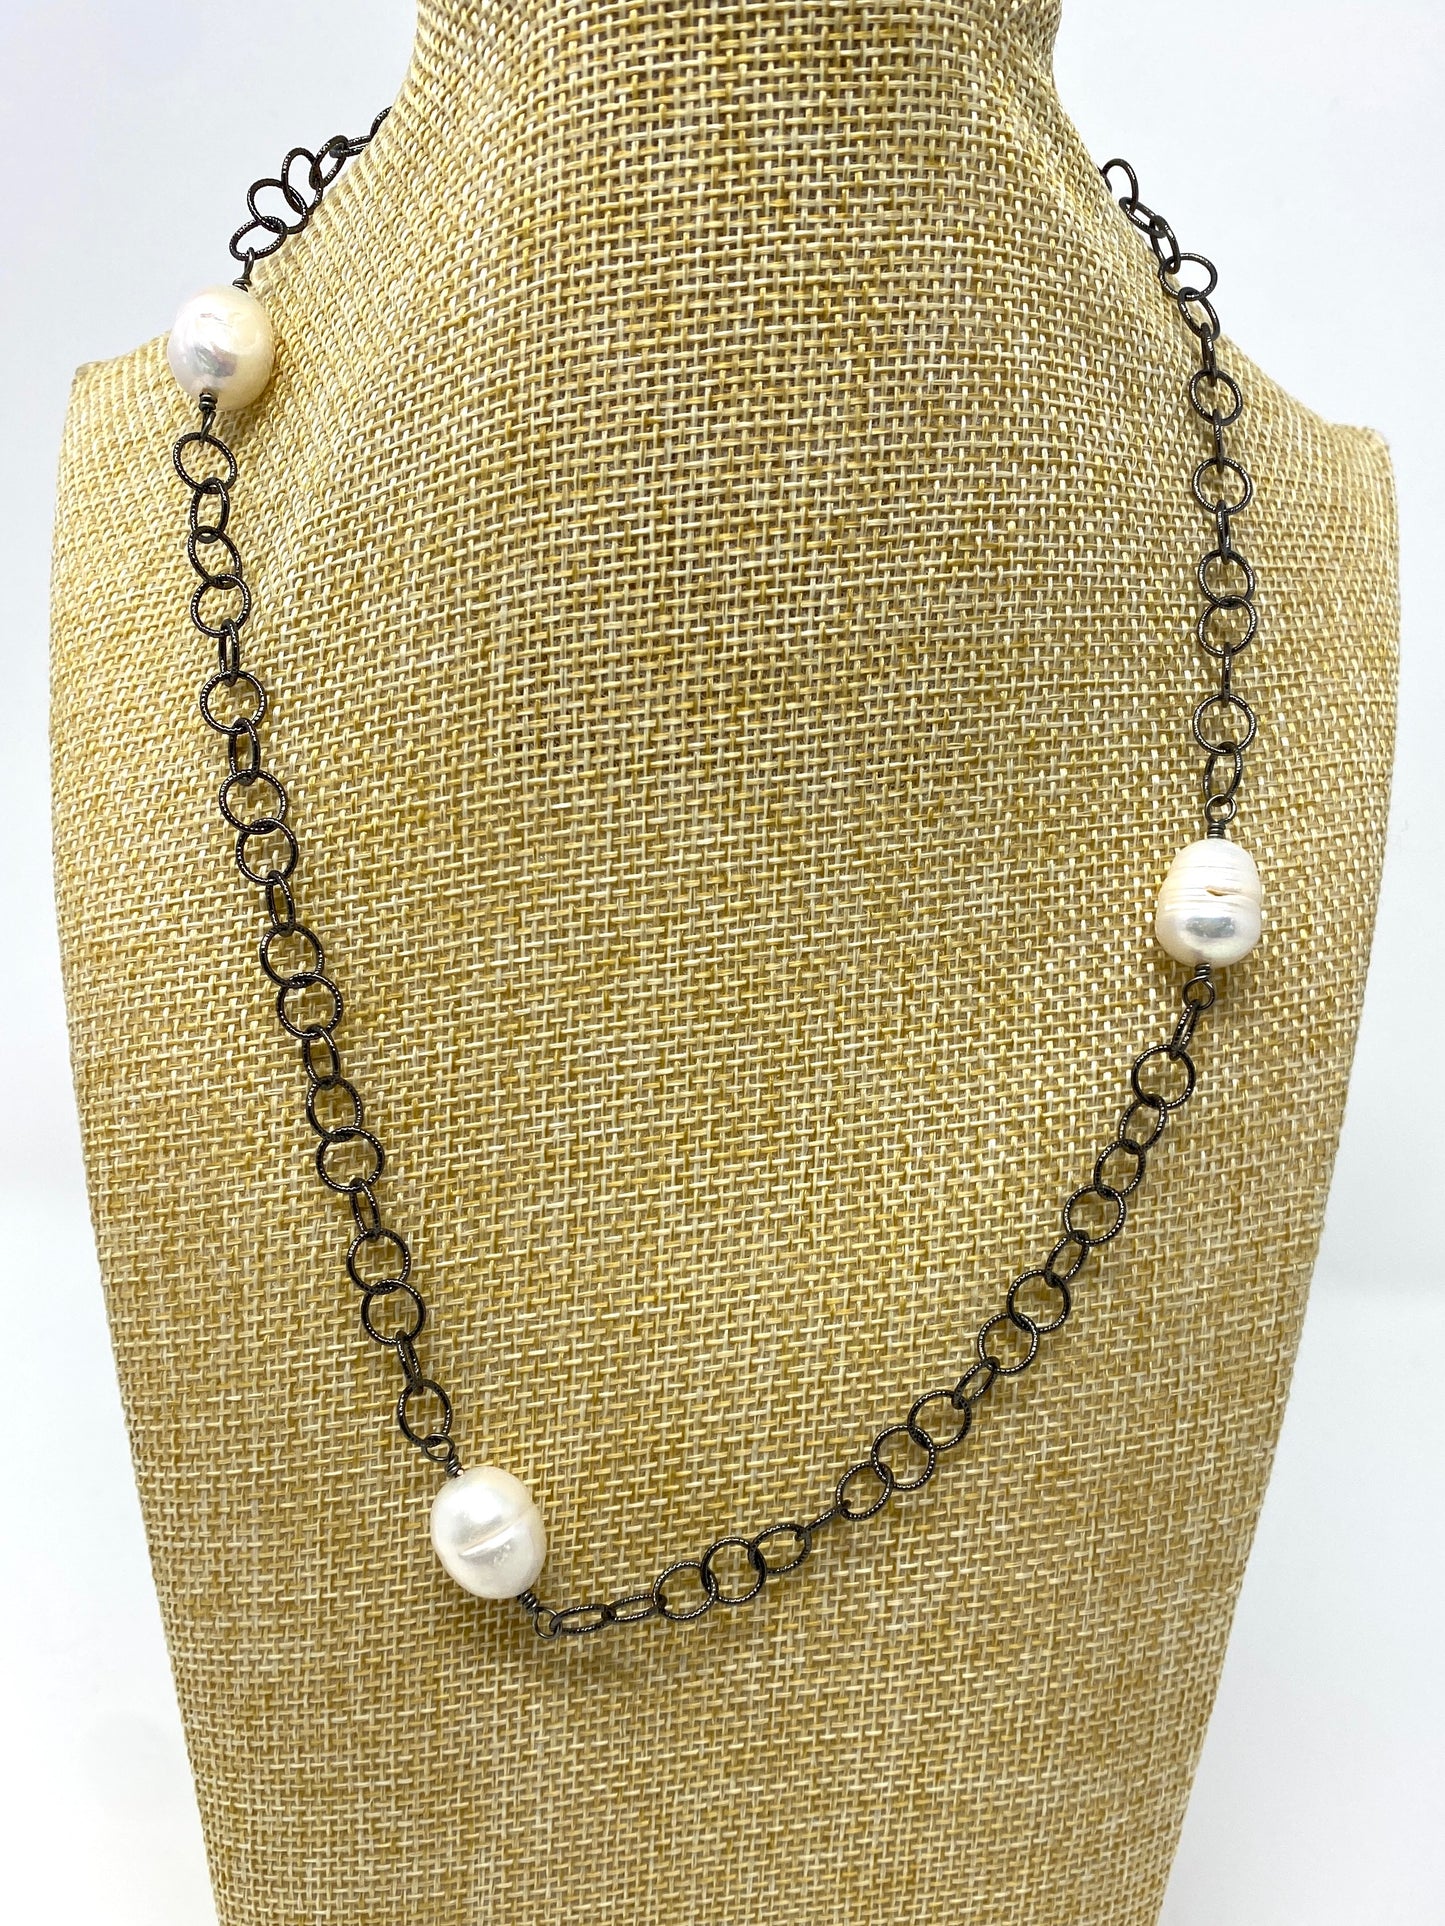 Oxidized Metal Chain Necklace With Three Freshwater Pearls